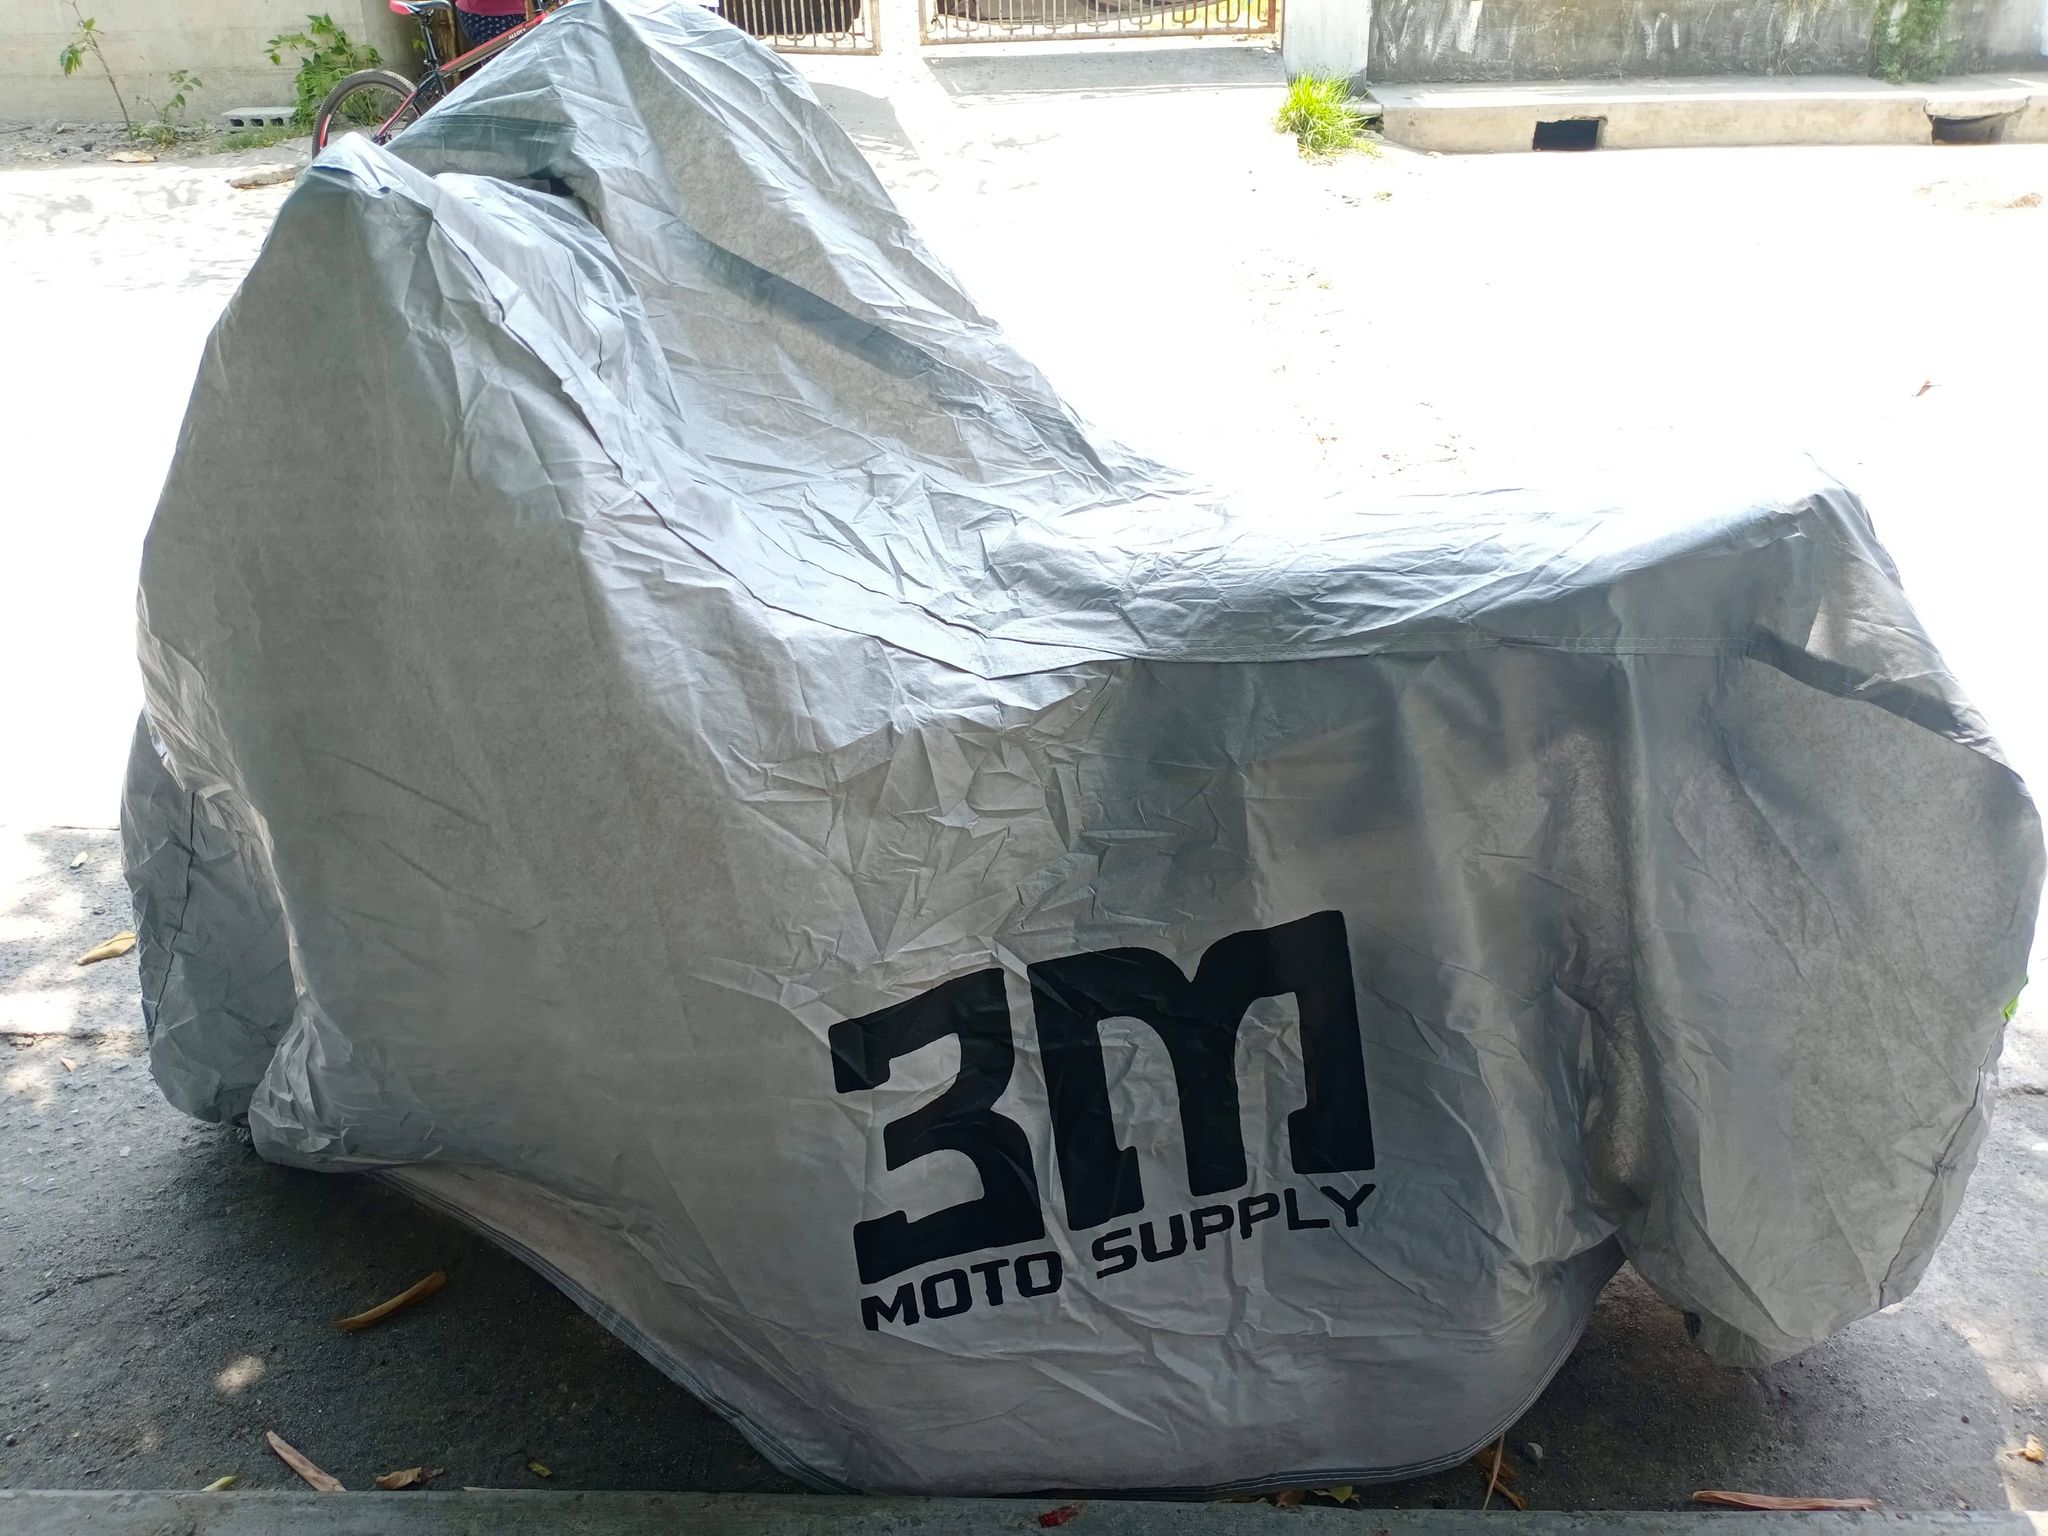 JMS SKYDRIVE CARB 125 MOTORCYCLE COVER THREE M, With Strap Lock/Double  Lining Reflectorize /Cotton Lining/Lock Hole, Heavy duty & durable -COD